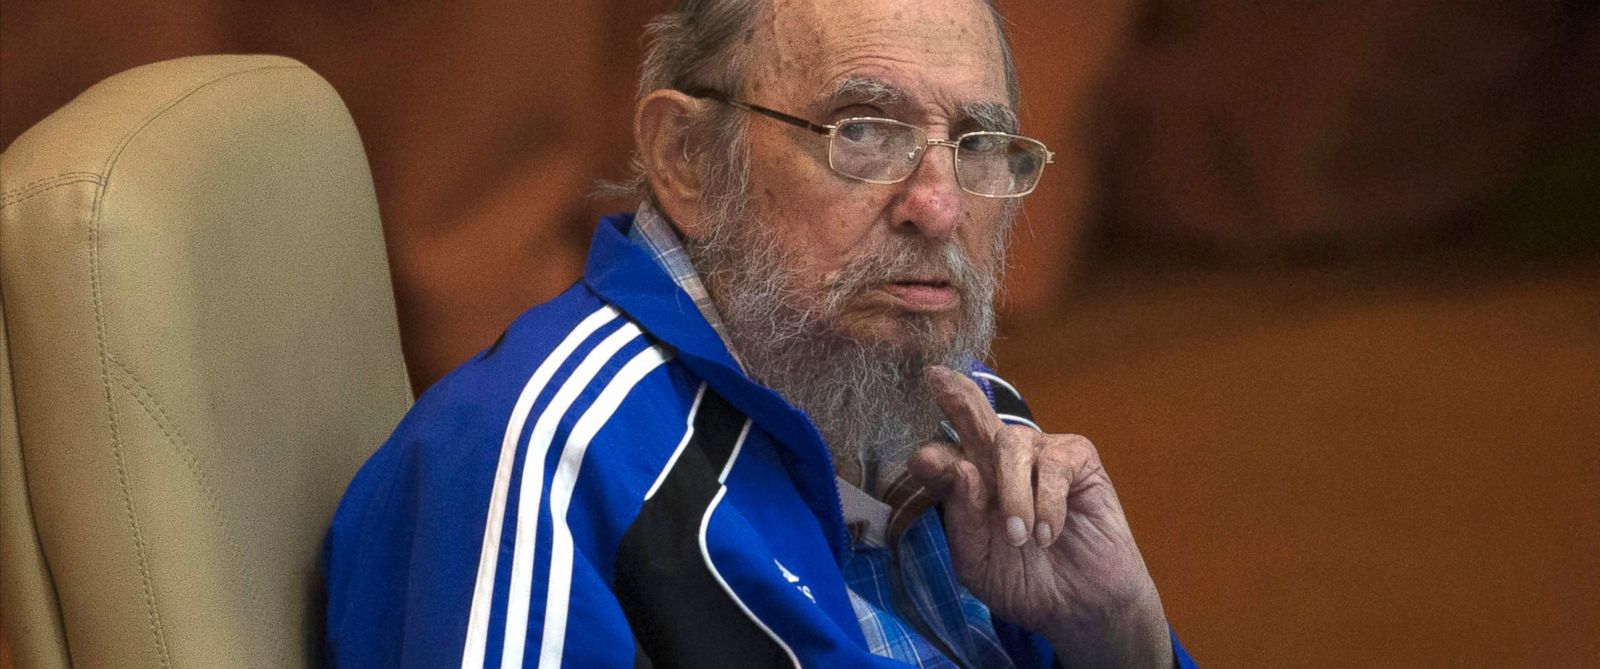 Fidel Castro Gives Rare Speech Saying He’s Nearing the End